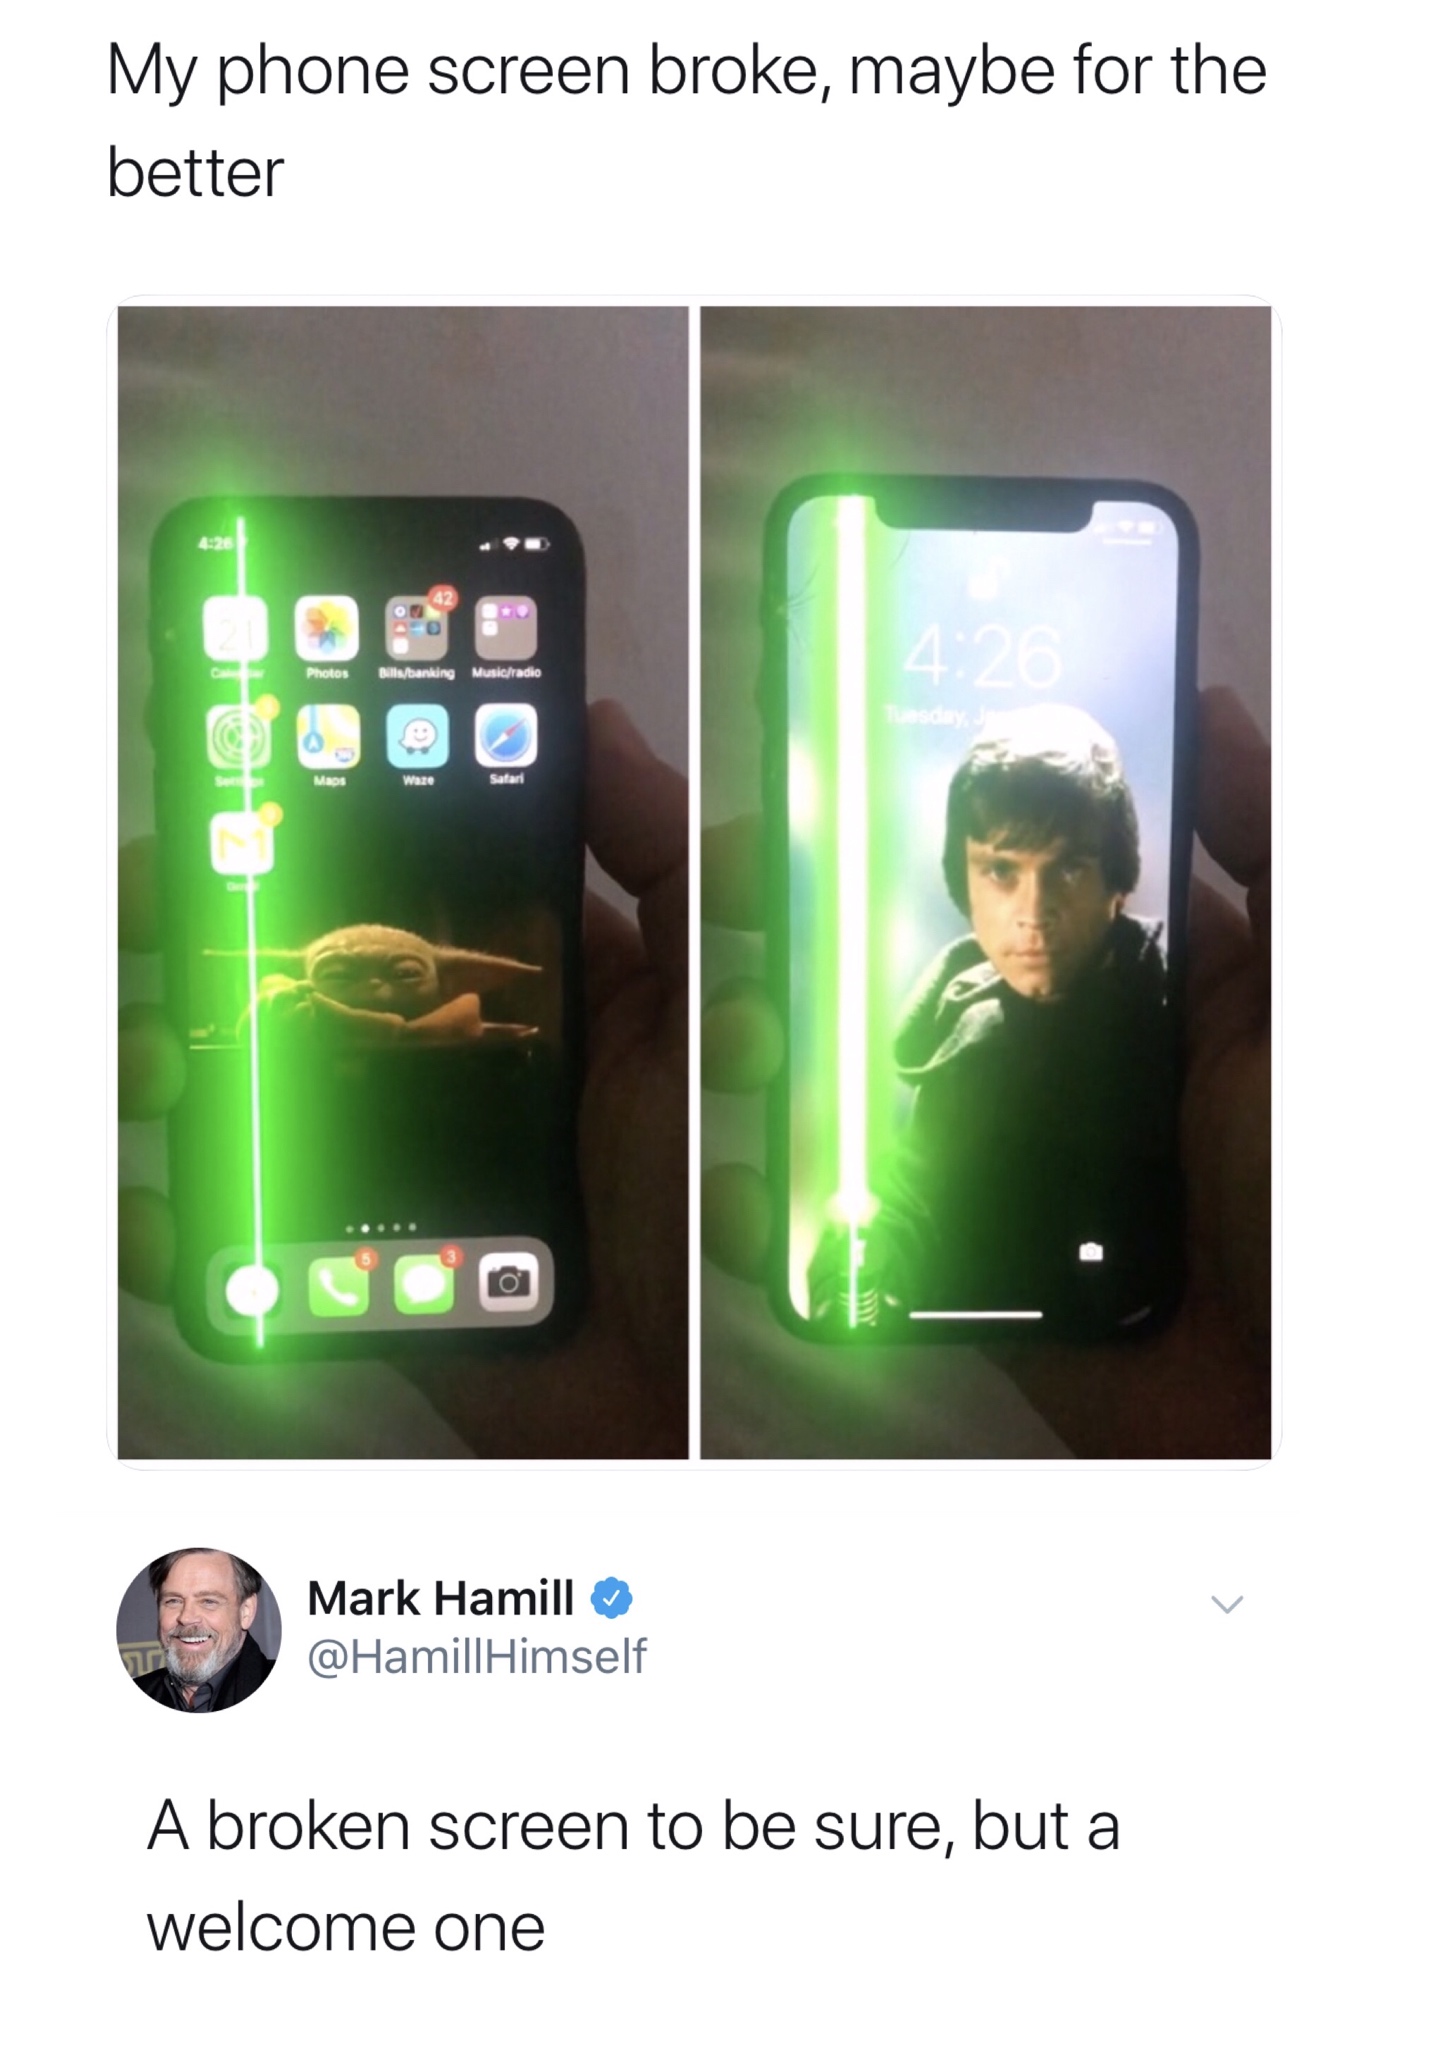 electronics - My phone screen broke, maybe for the better Photos Billsbanking Musicradio Maps Waze Safari Mark Hamill Himself A broken screen to be sure, but a welcome one